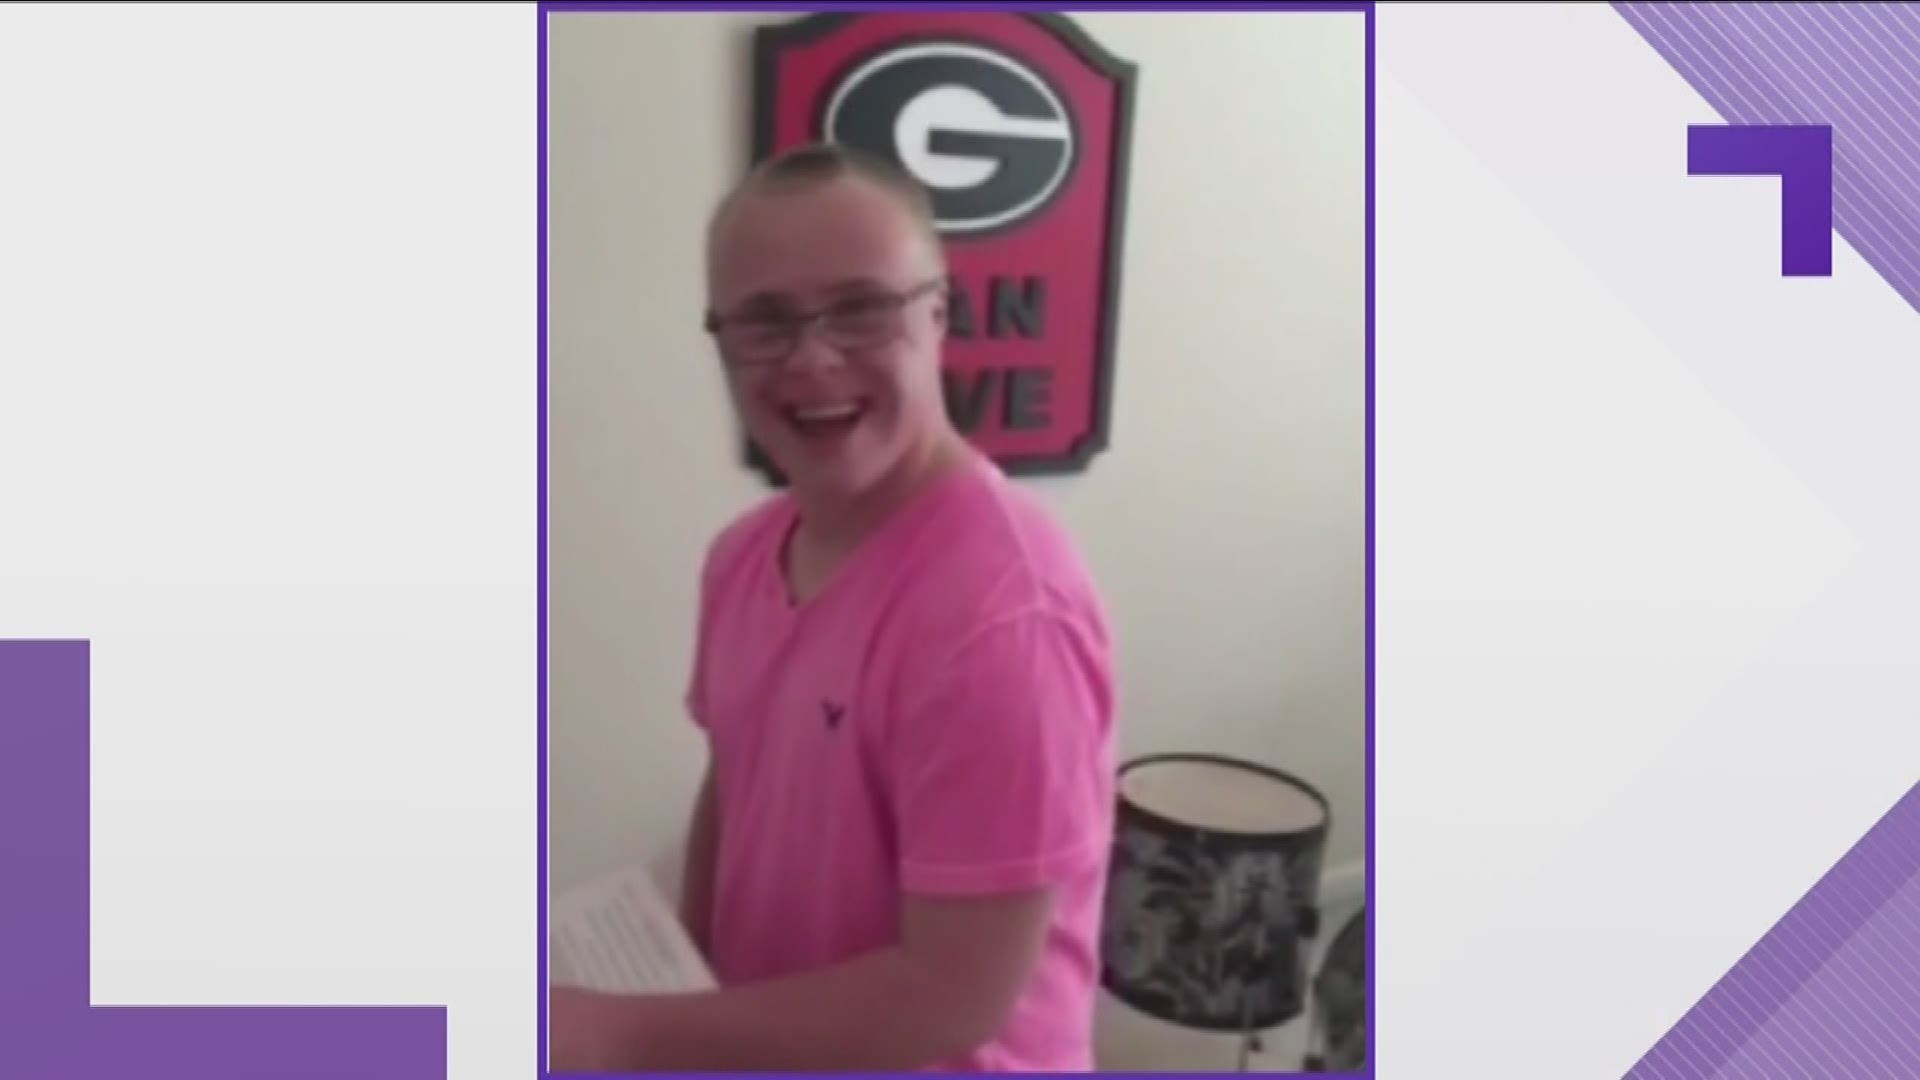 Jordan's acceptance into the school's first-ever class for people with intellectual disabilities went viral.